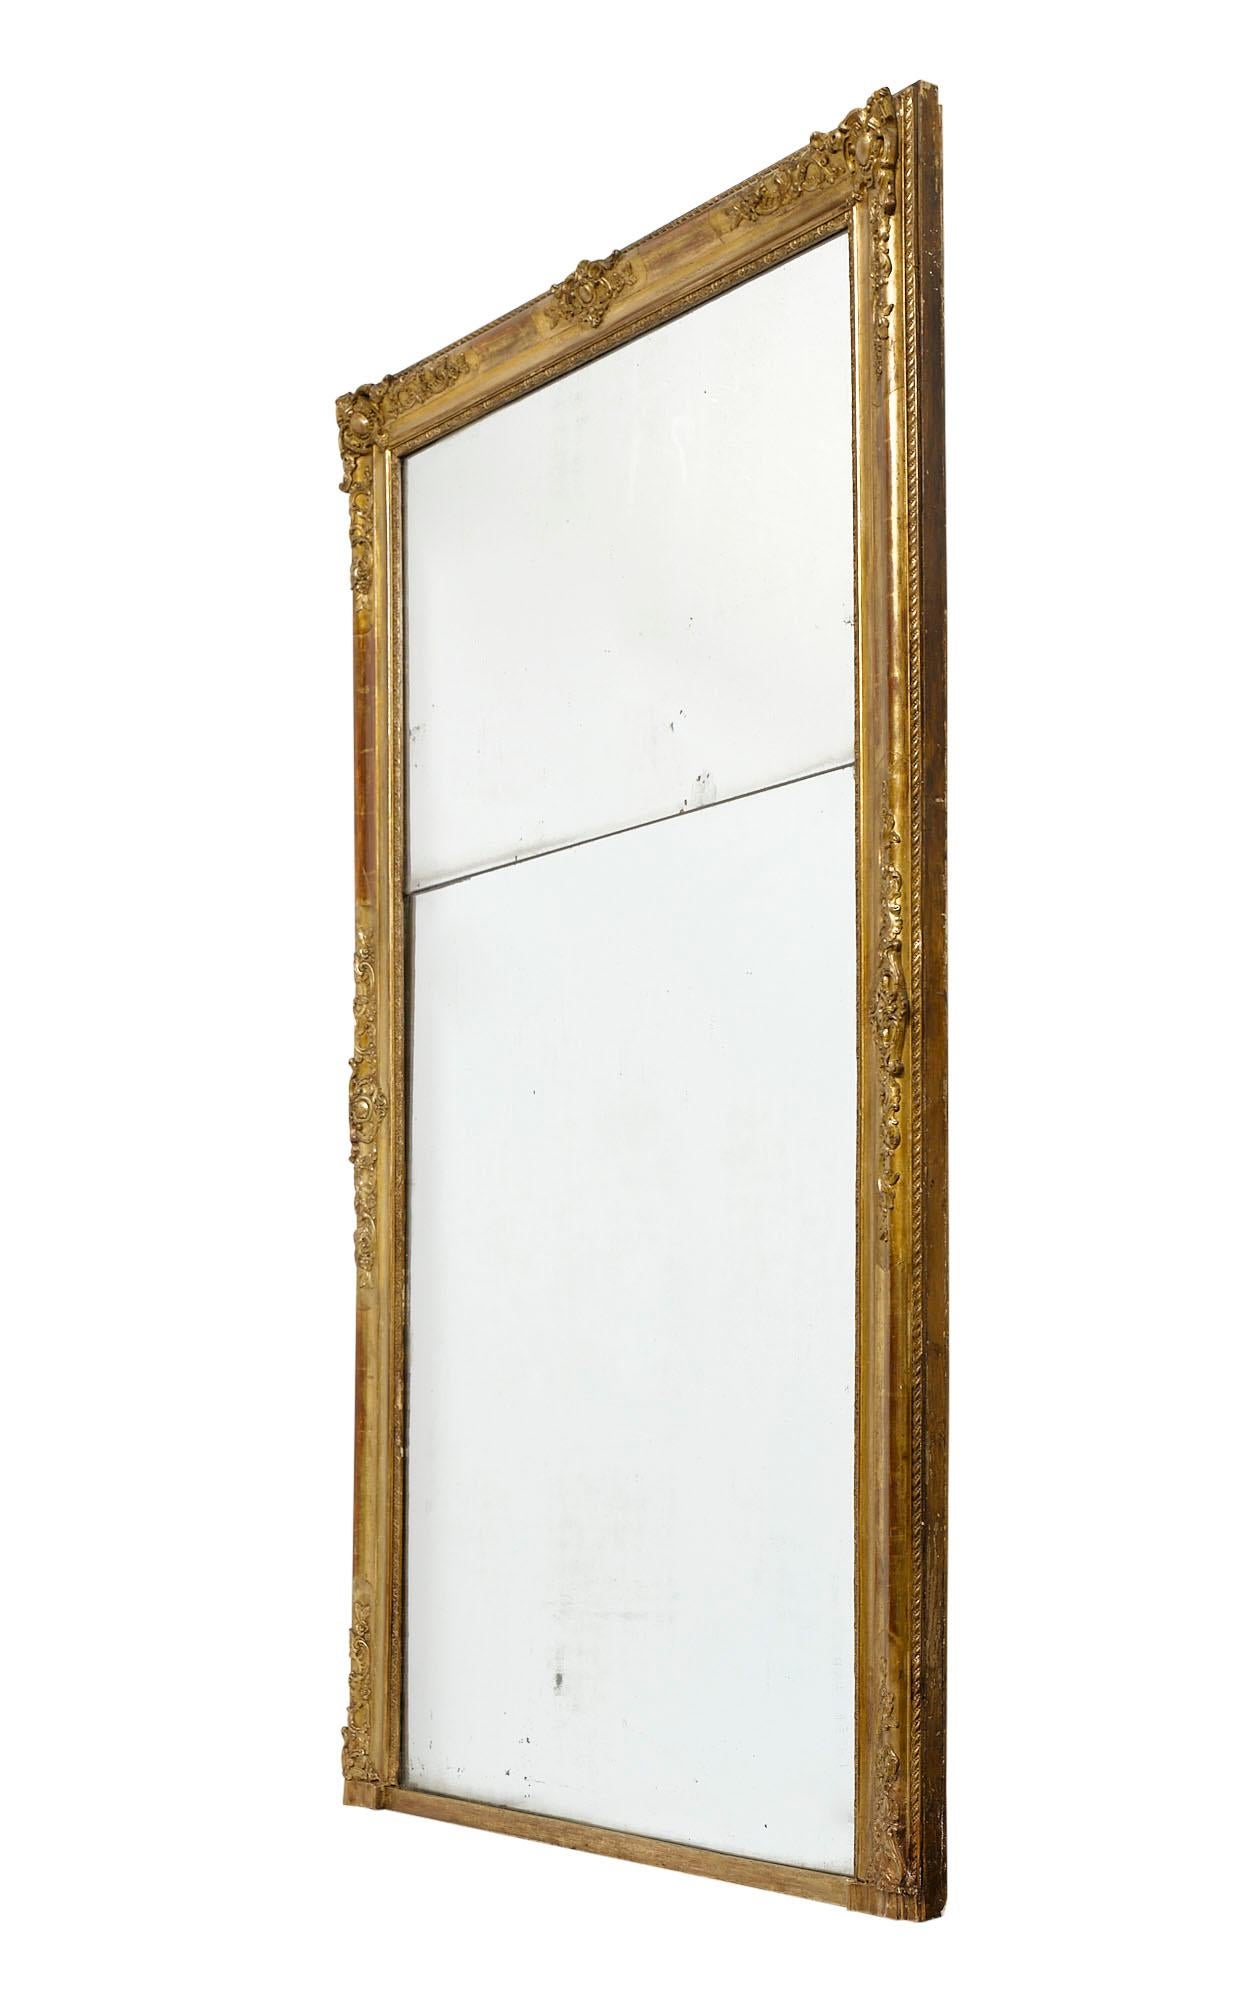 Pair of mirrors from France in the Louis XVI style. This 19th century pair has hand-carved wood frames with beautiful detail and original 23 carat gold leaf. The interior mercury mirror is also original and in two panels of mirror each. These